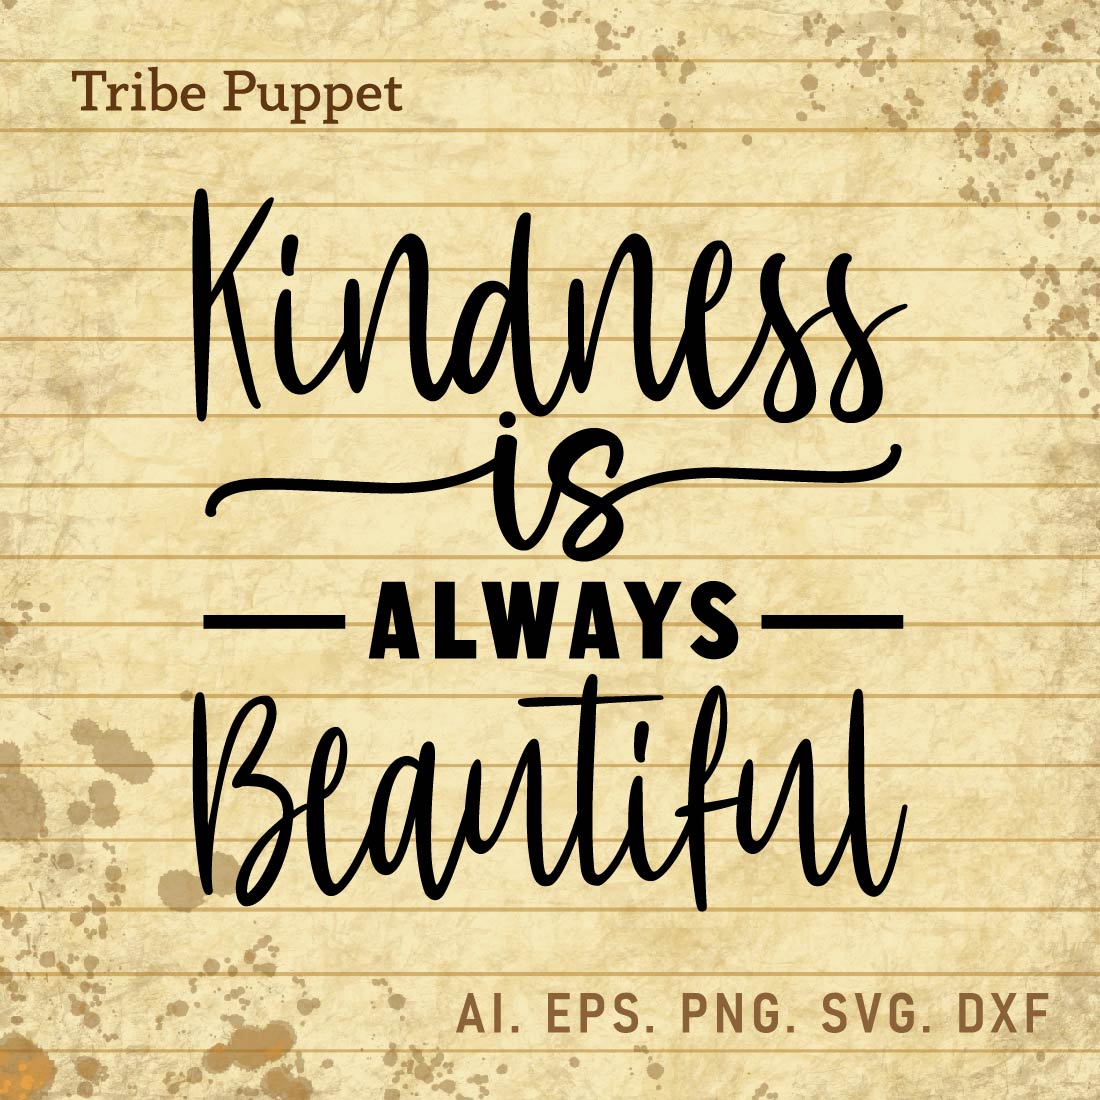 Kindness Quotes cover image.